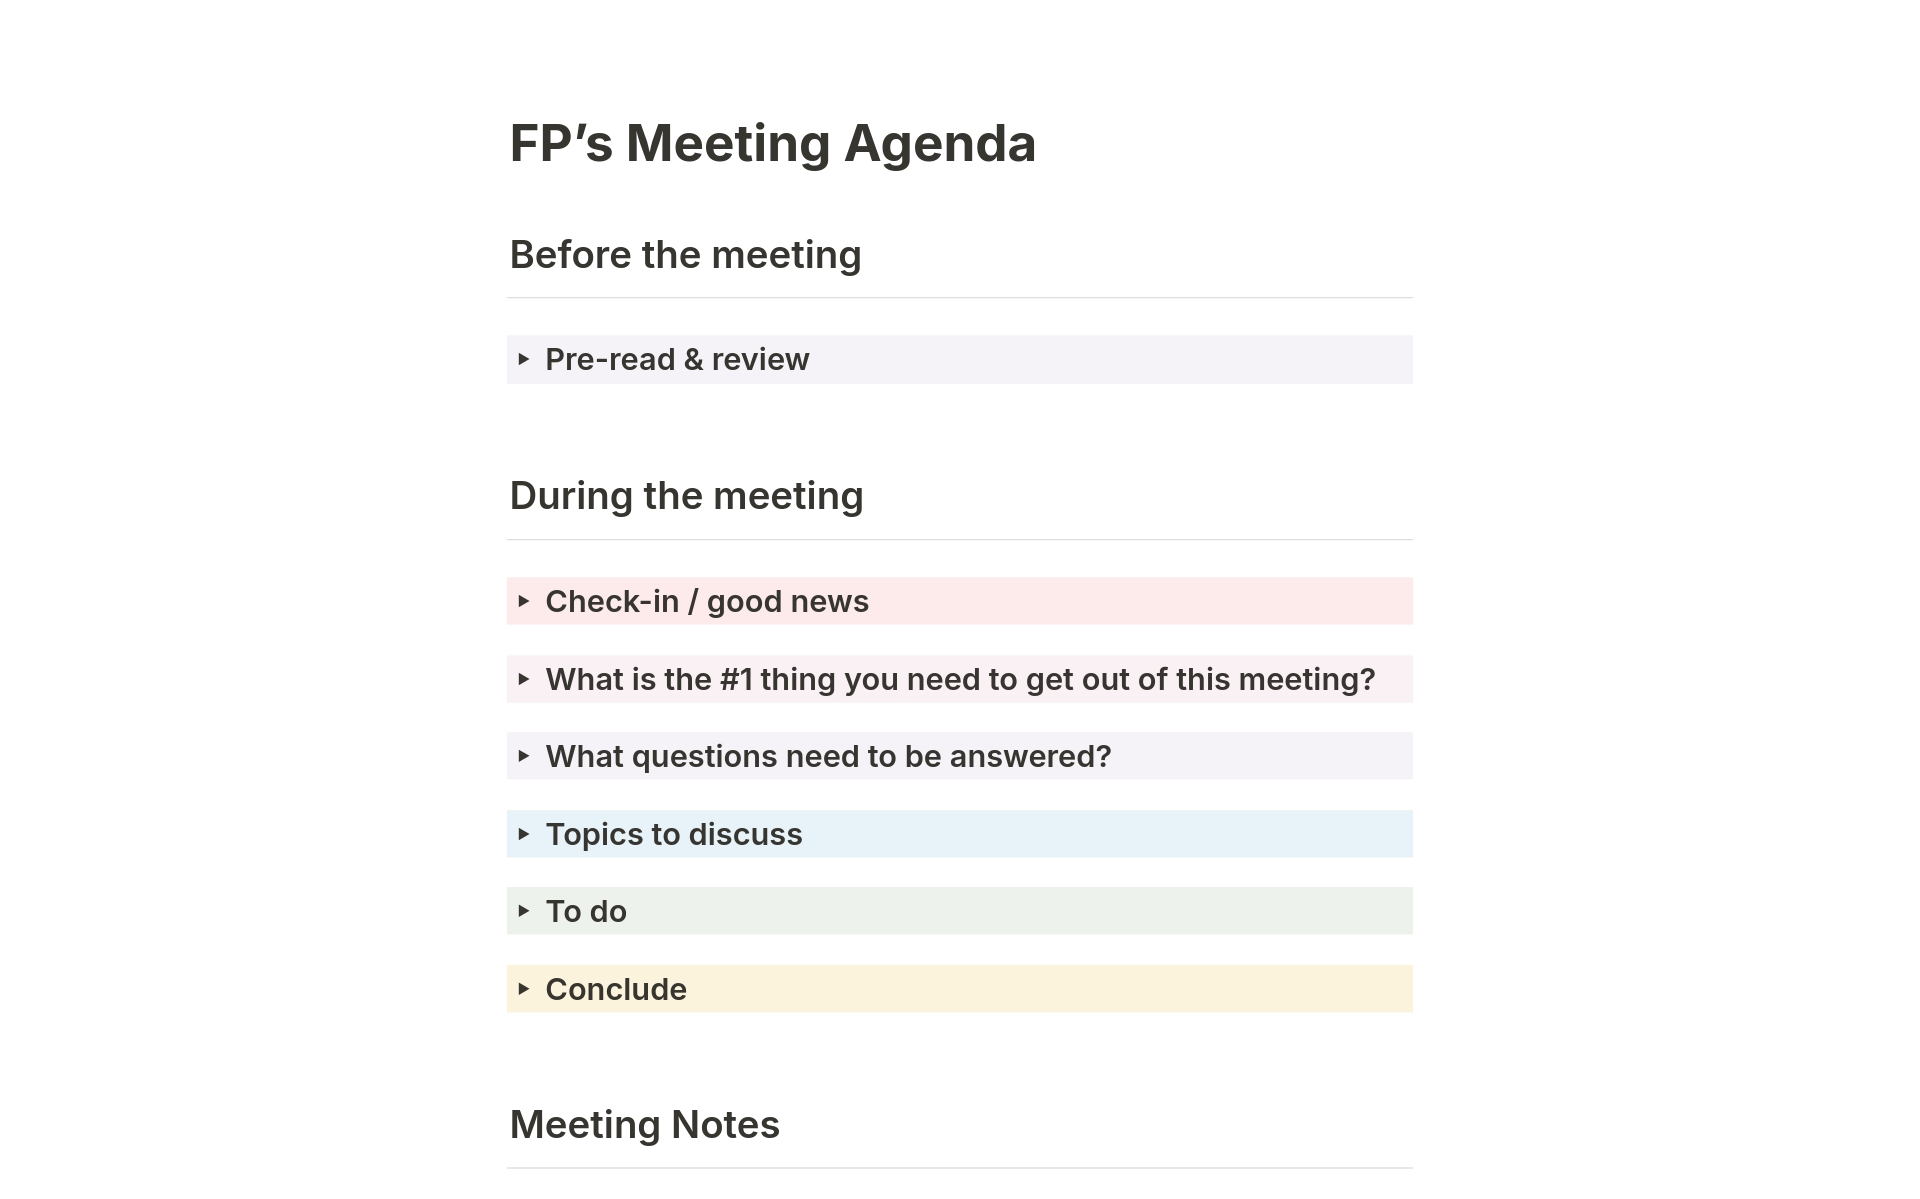 Meet your new ally for successful meetings - our comprehensive meeting agenda. With its clear and structured sections, it covers everything from pre-meeting preparation, key discussion topics, to post-meeting action items.